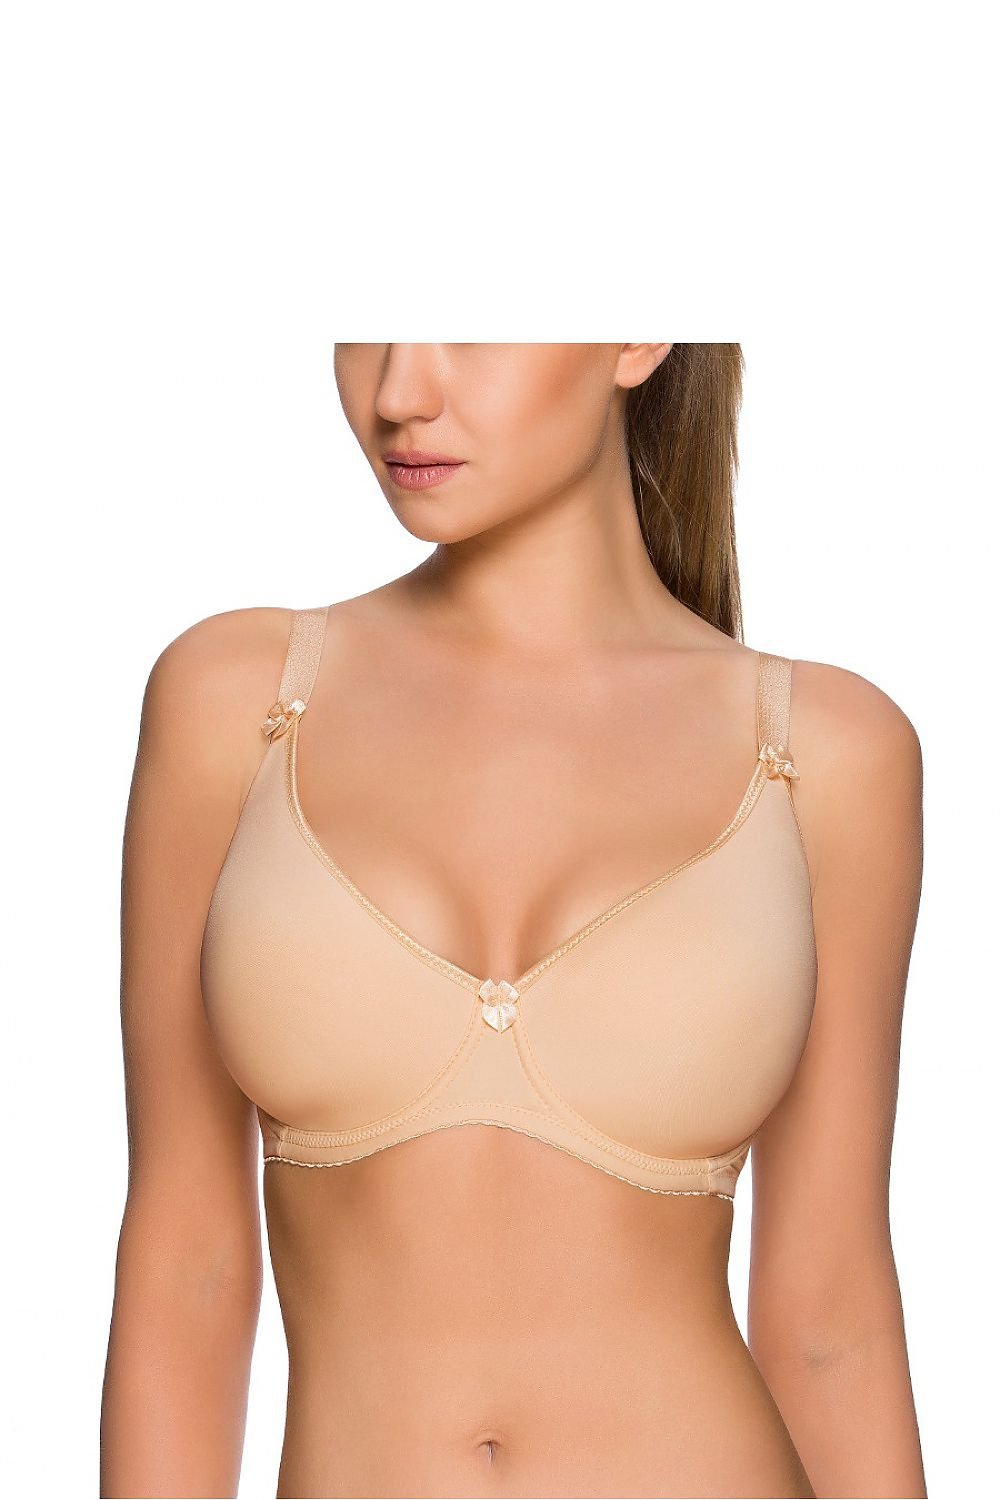 Wholesale padded bra no underwire For Supportive Underwear